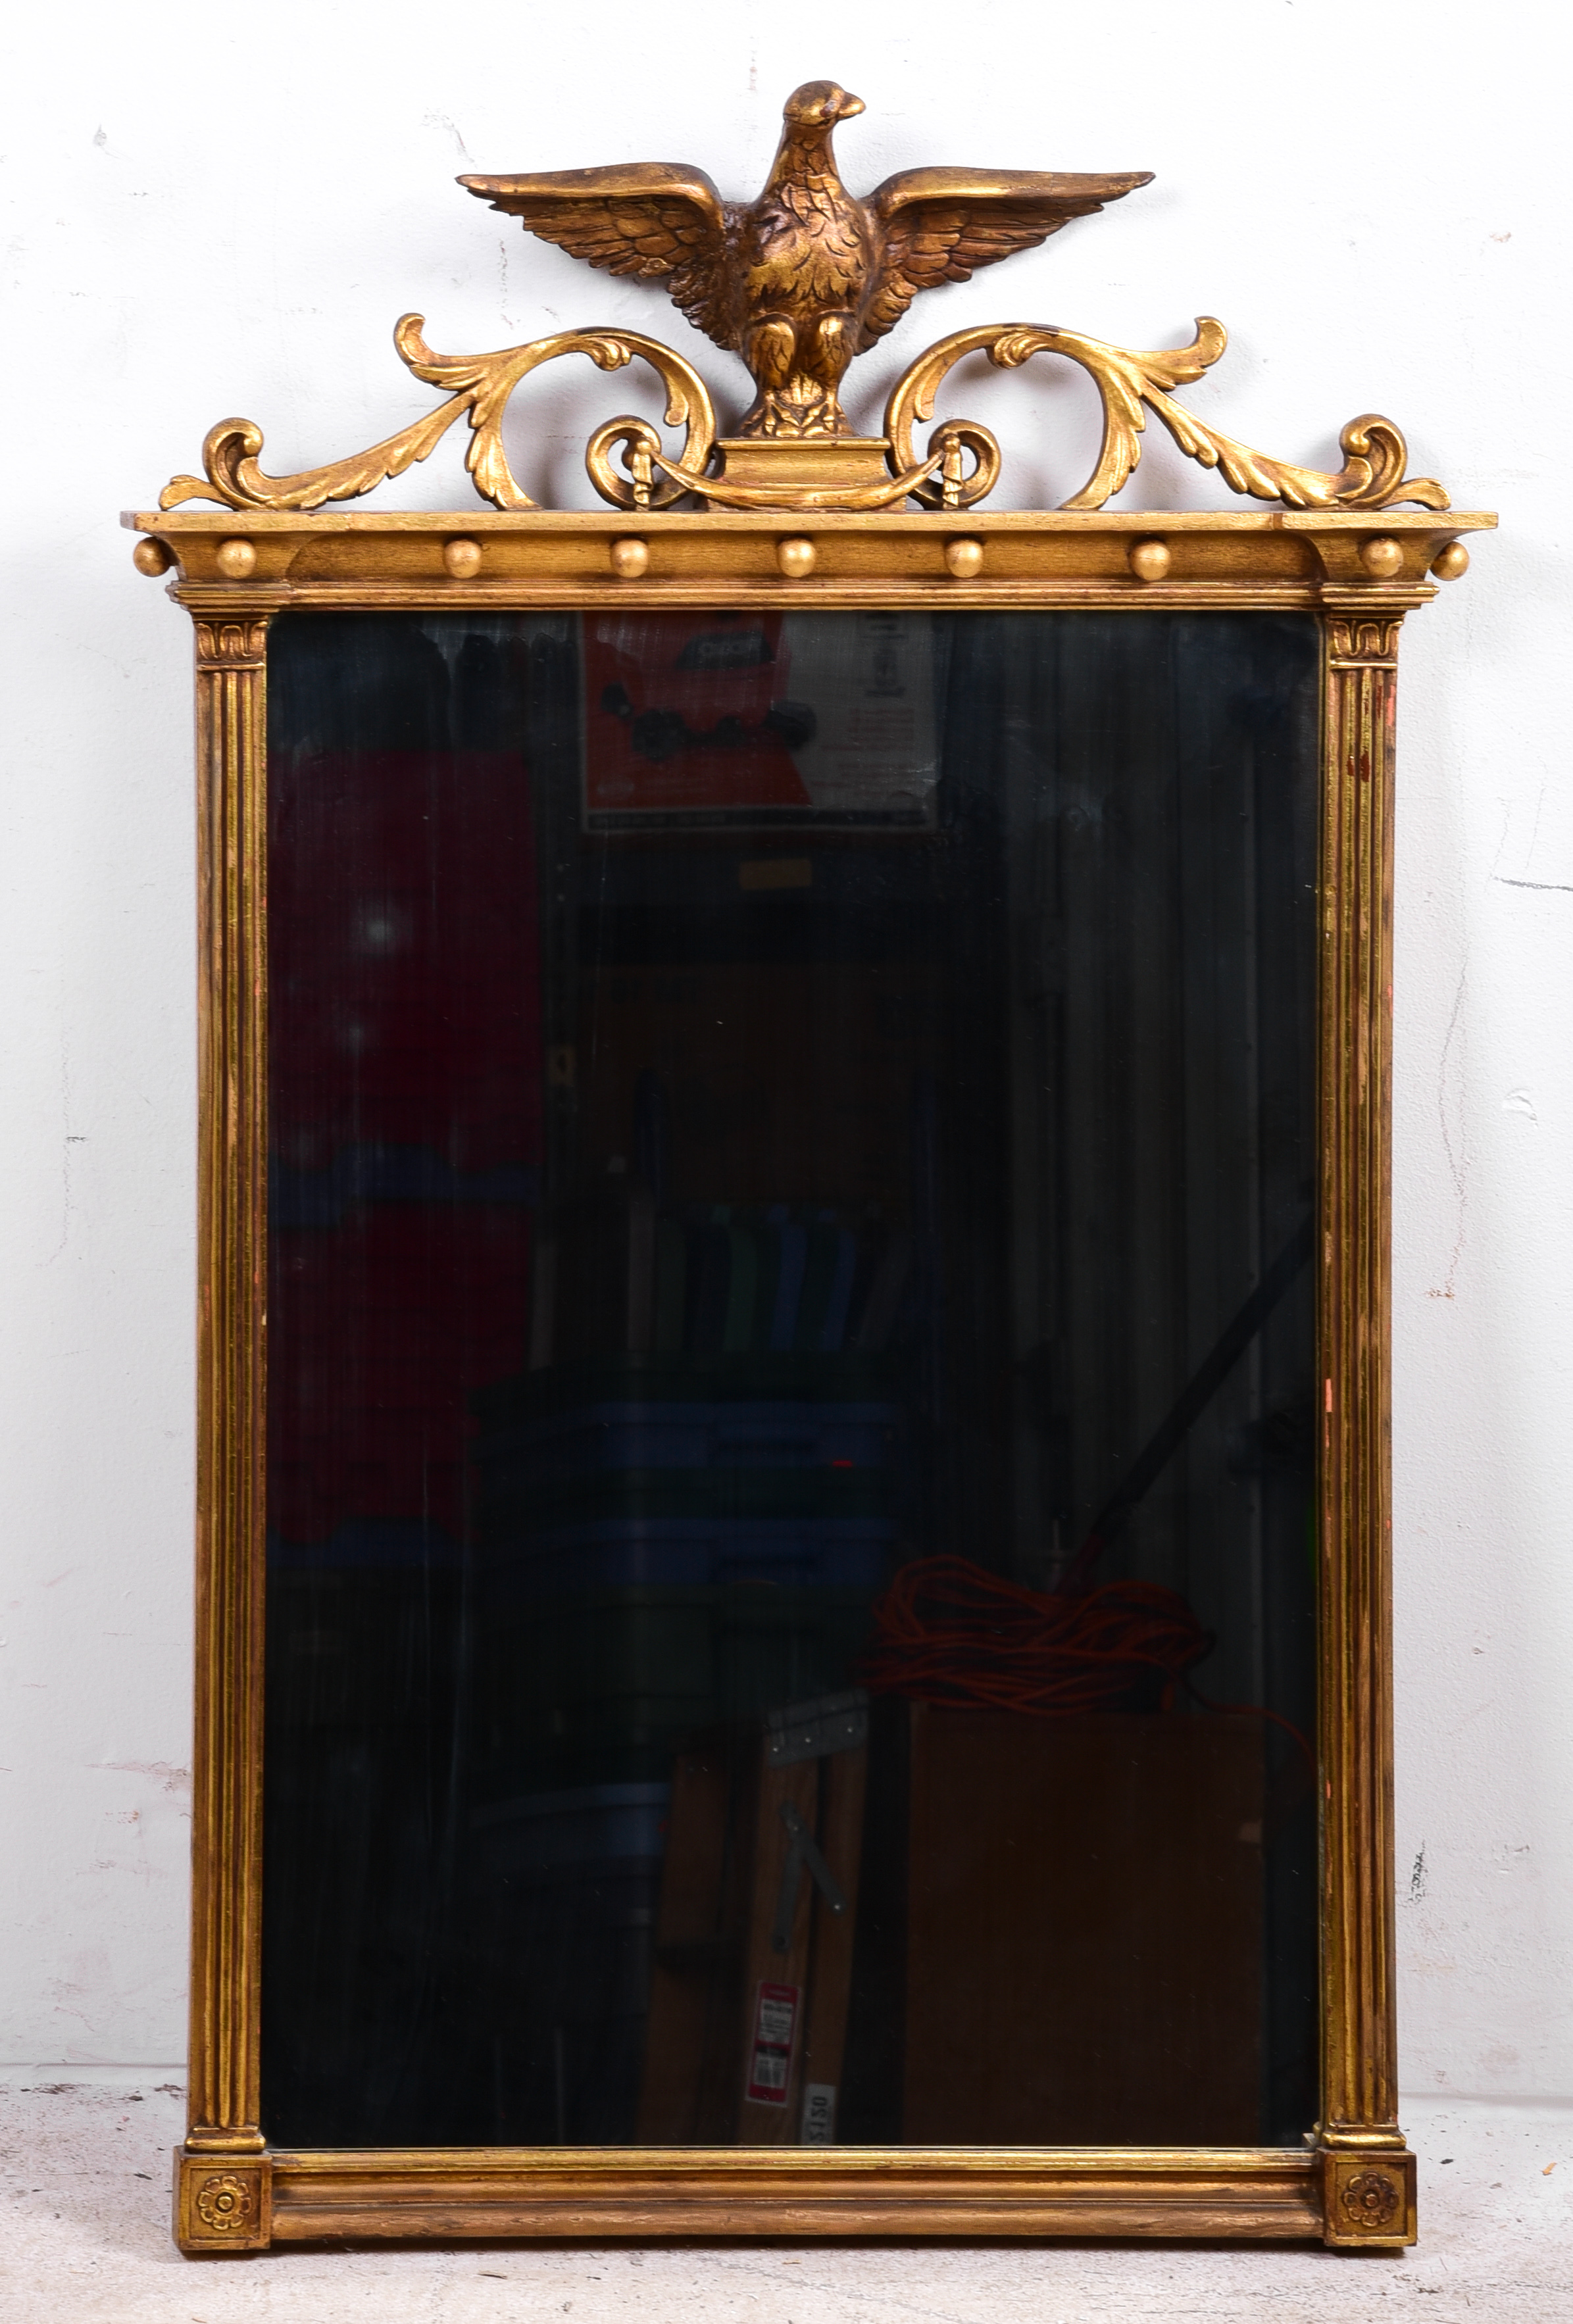 Federal style gilt hanging wall